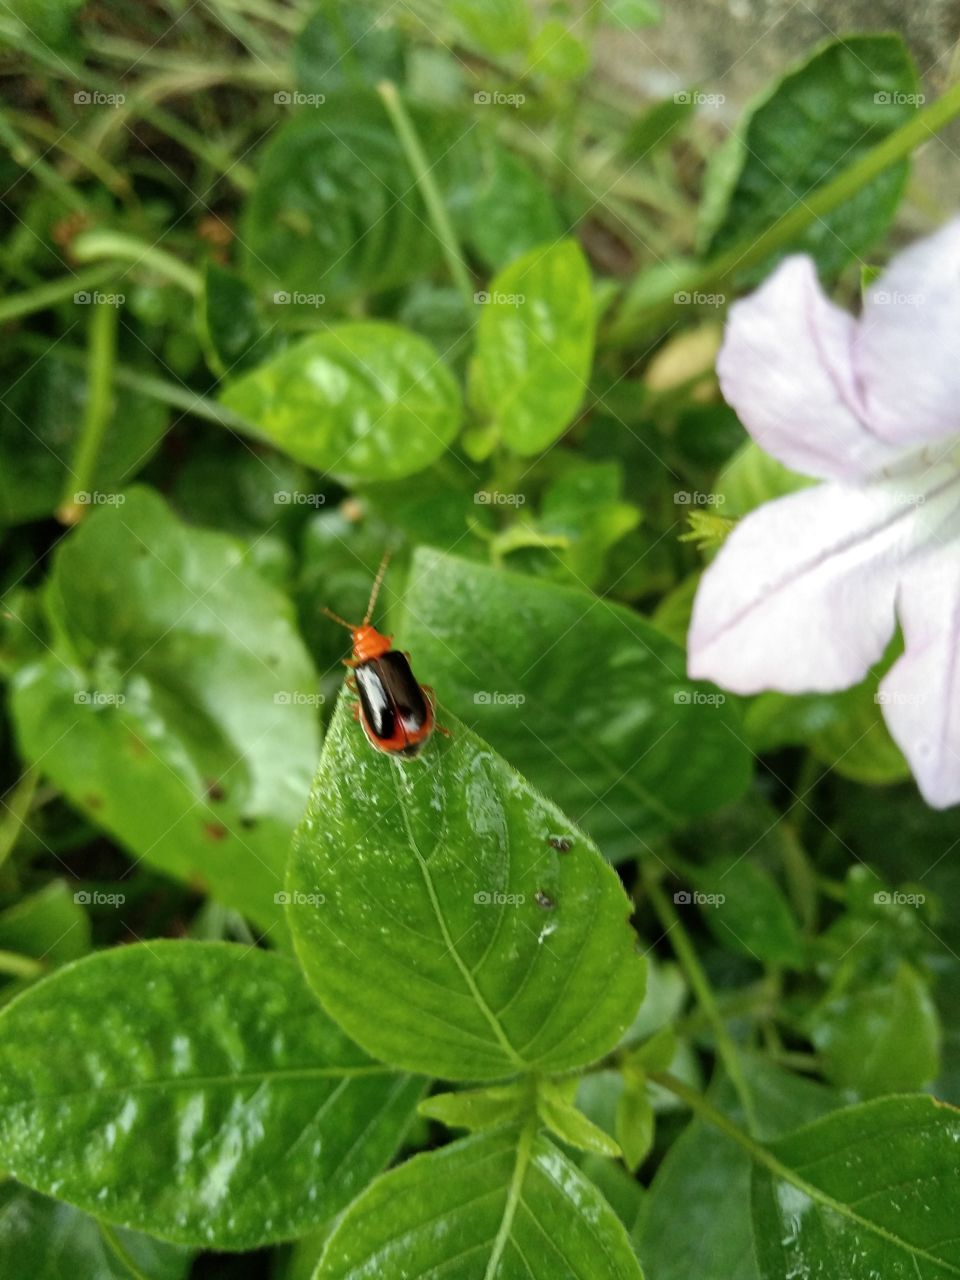 A Very Beautiful Black & Orange Insect, With Green Leaf.